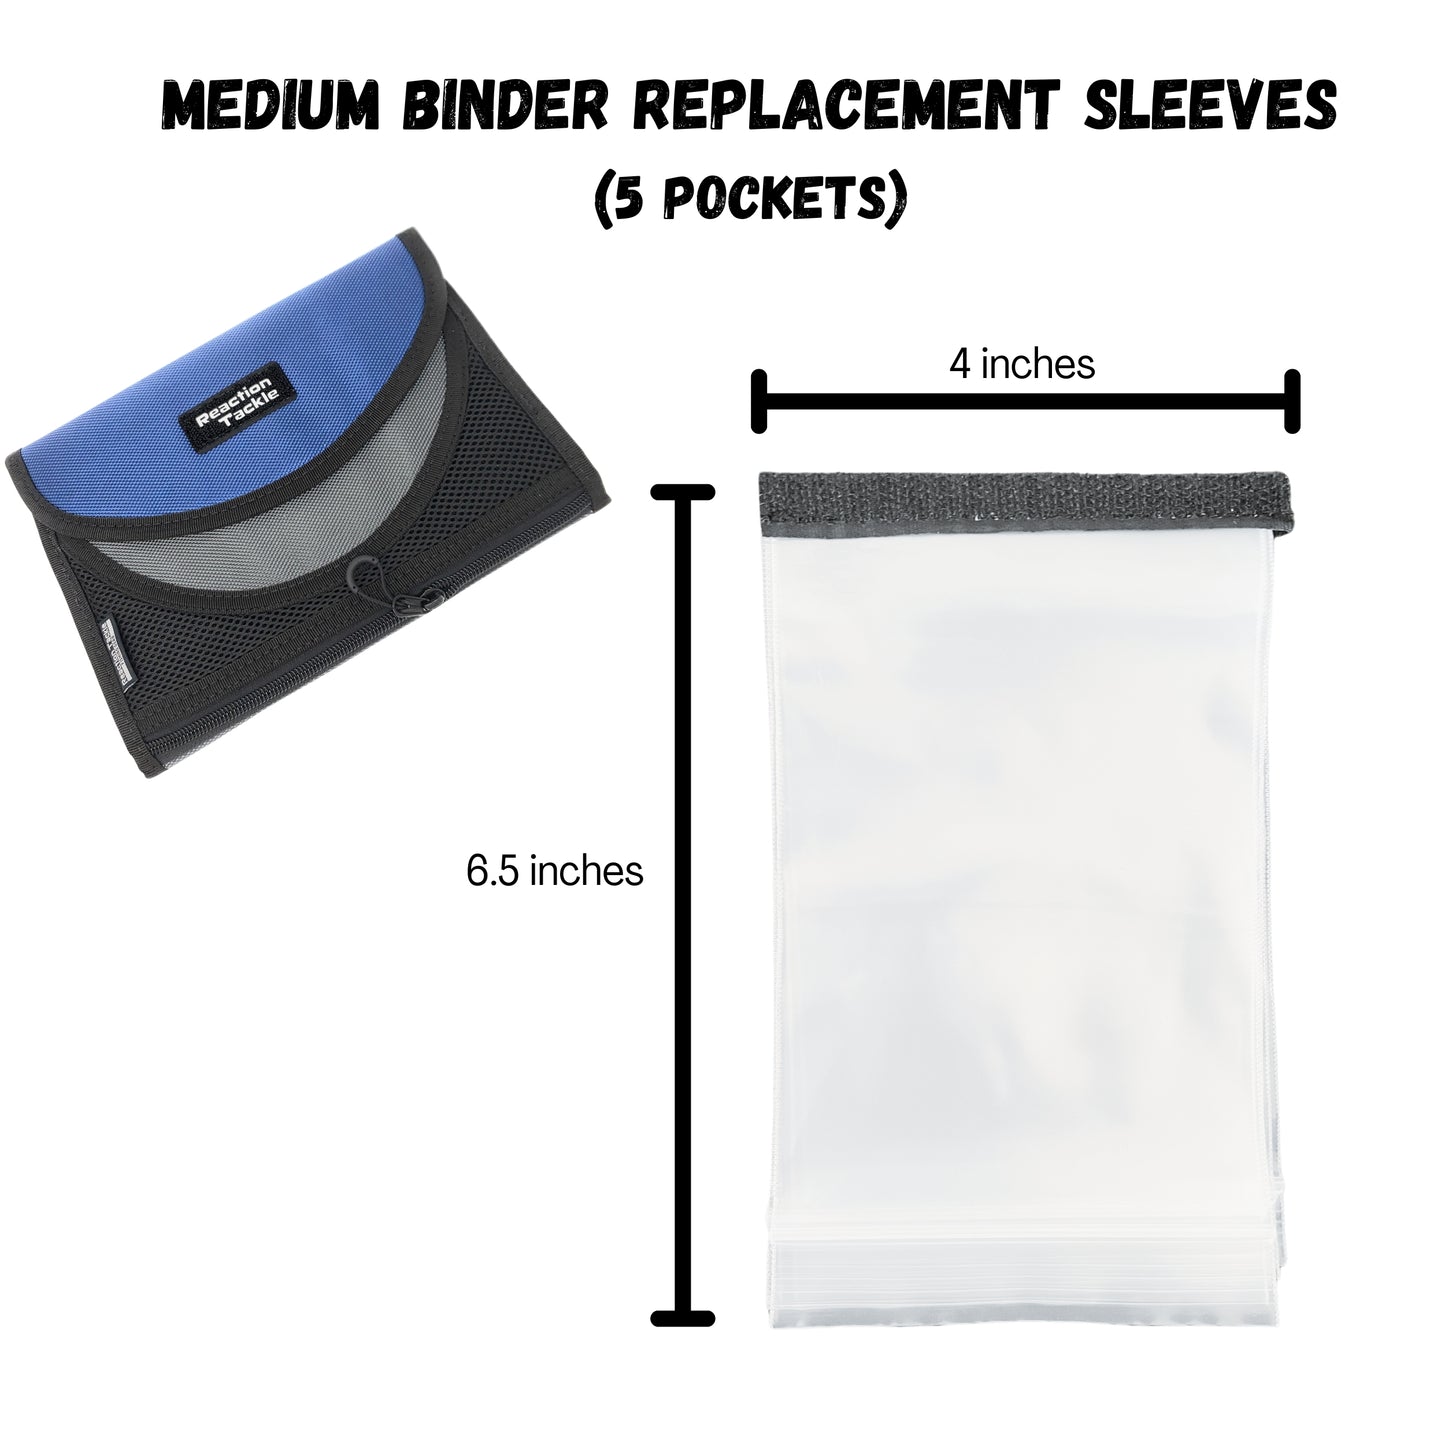 Replacement Sleeves for Small and Medium Binders